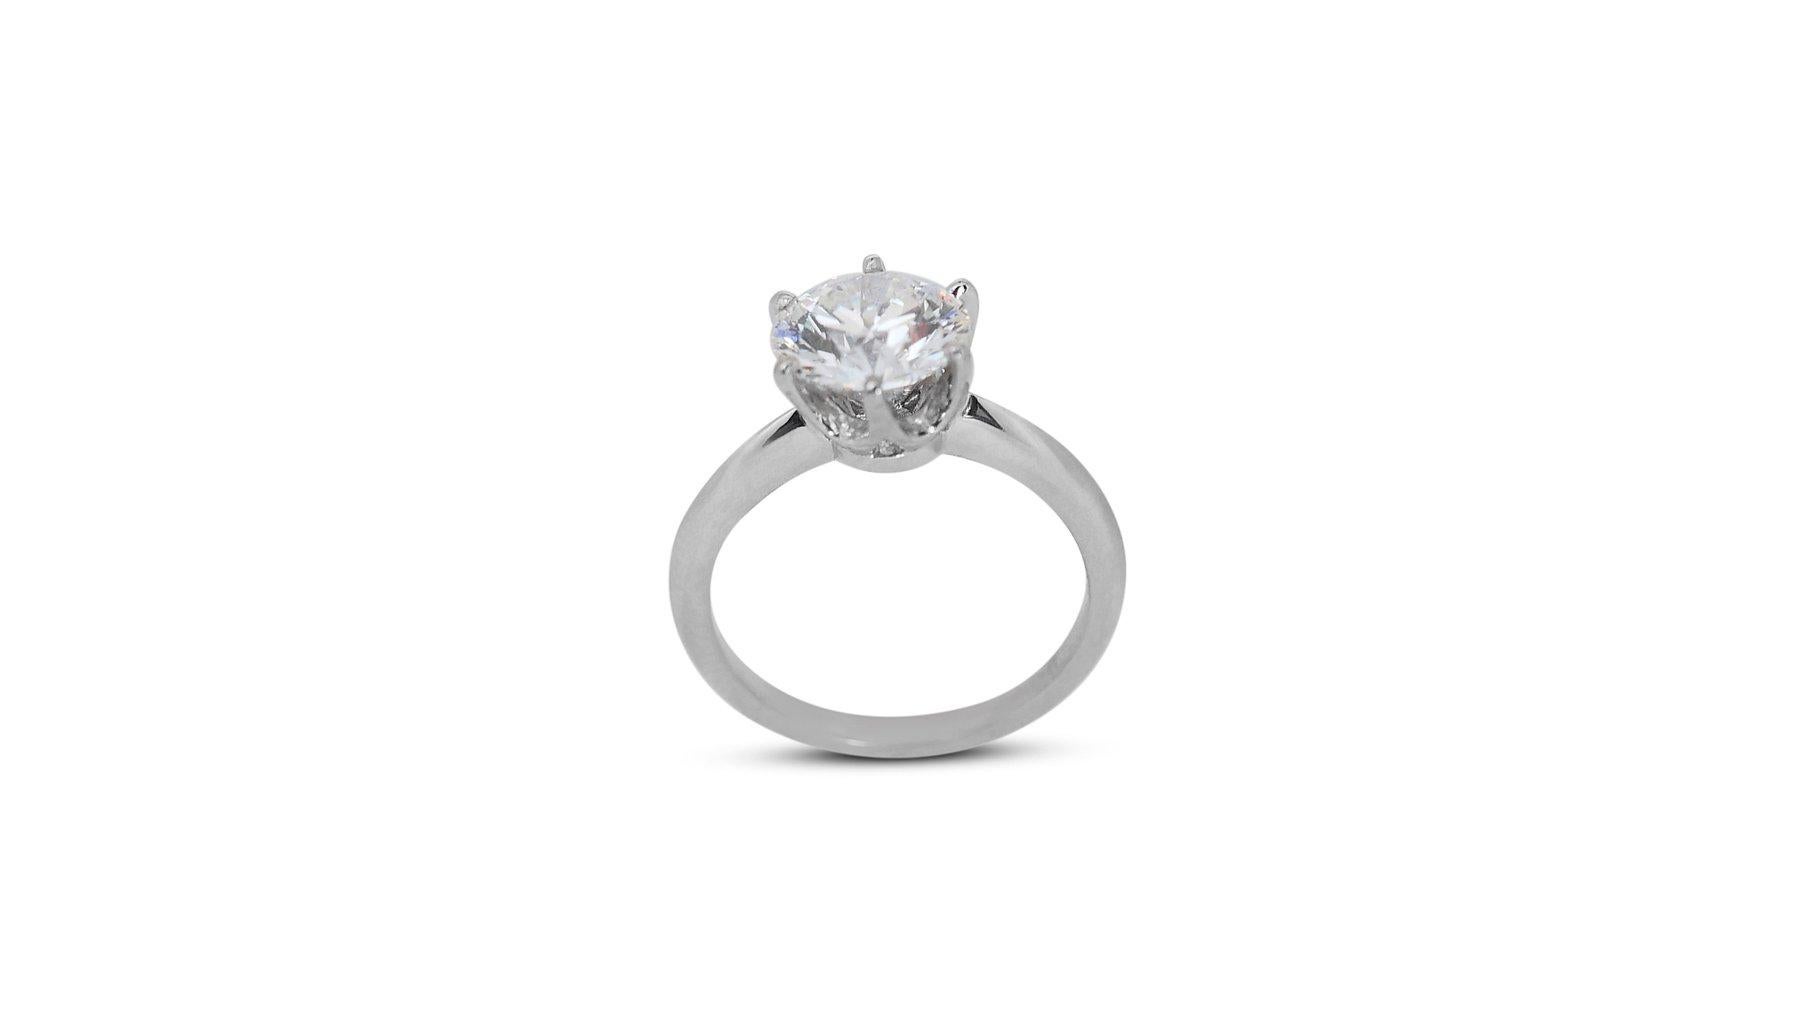 Stunning 18k White Gold 3.00 Carat Round Brilliant Diamond Solitaire Ring For Sale 4